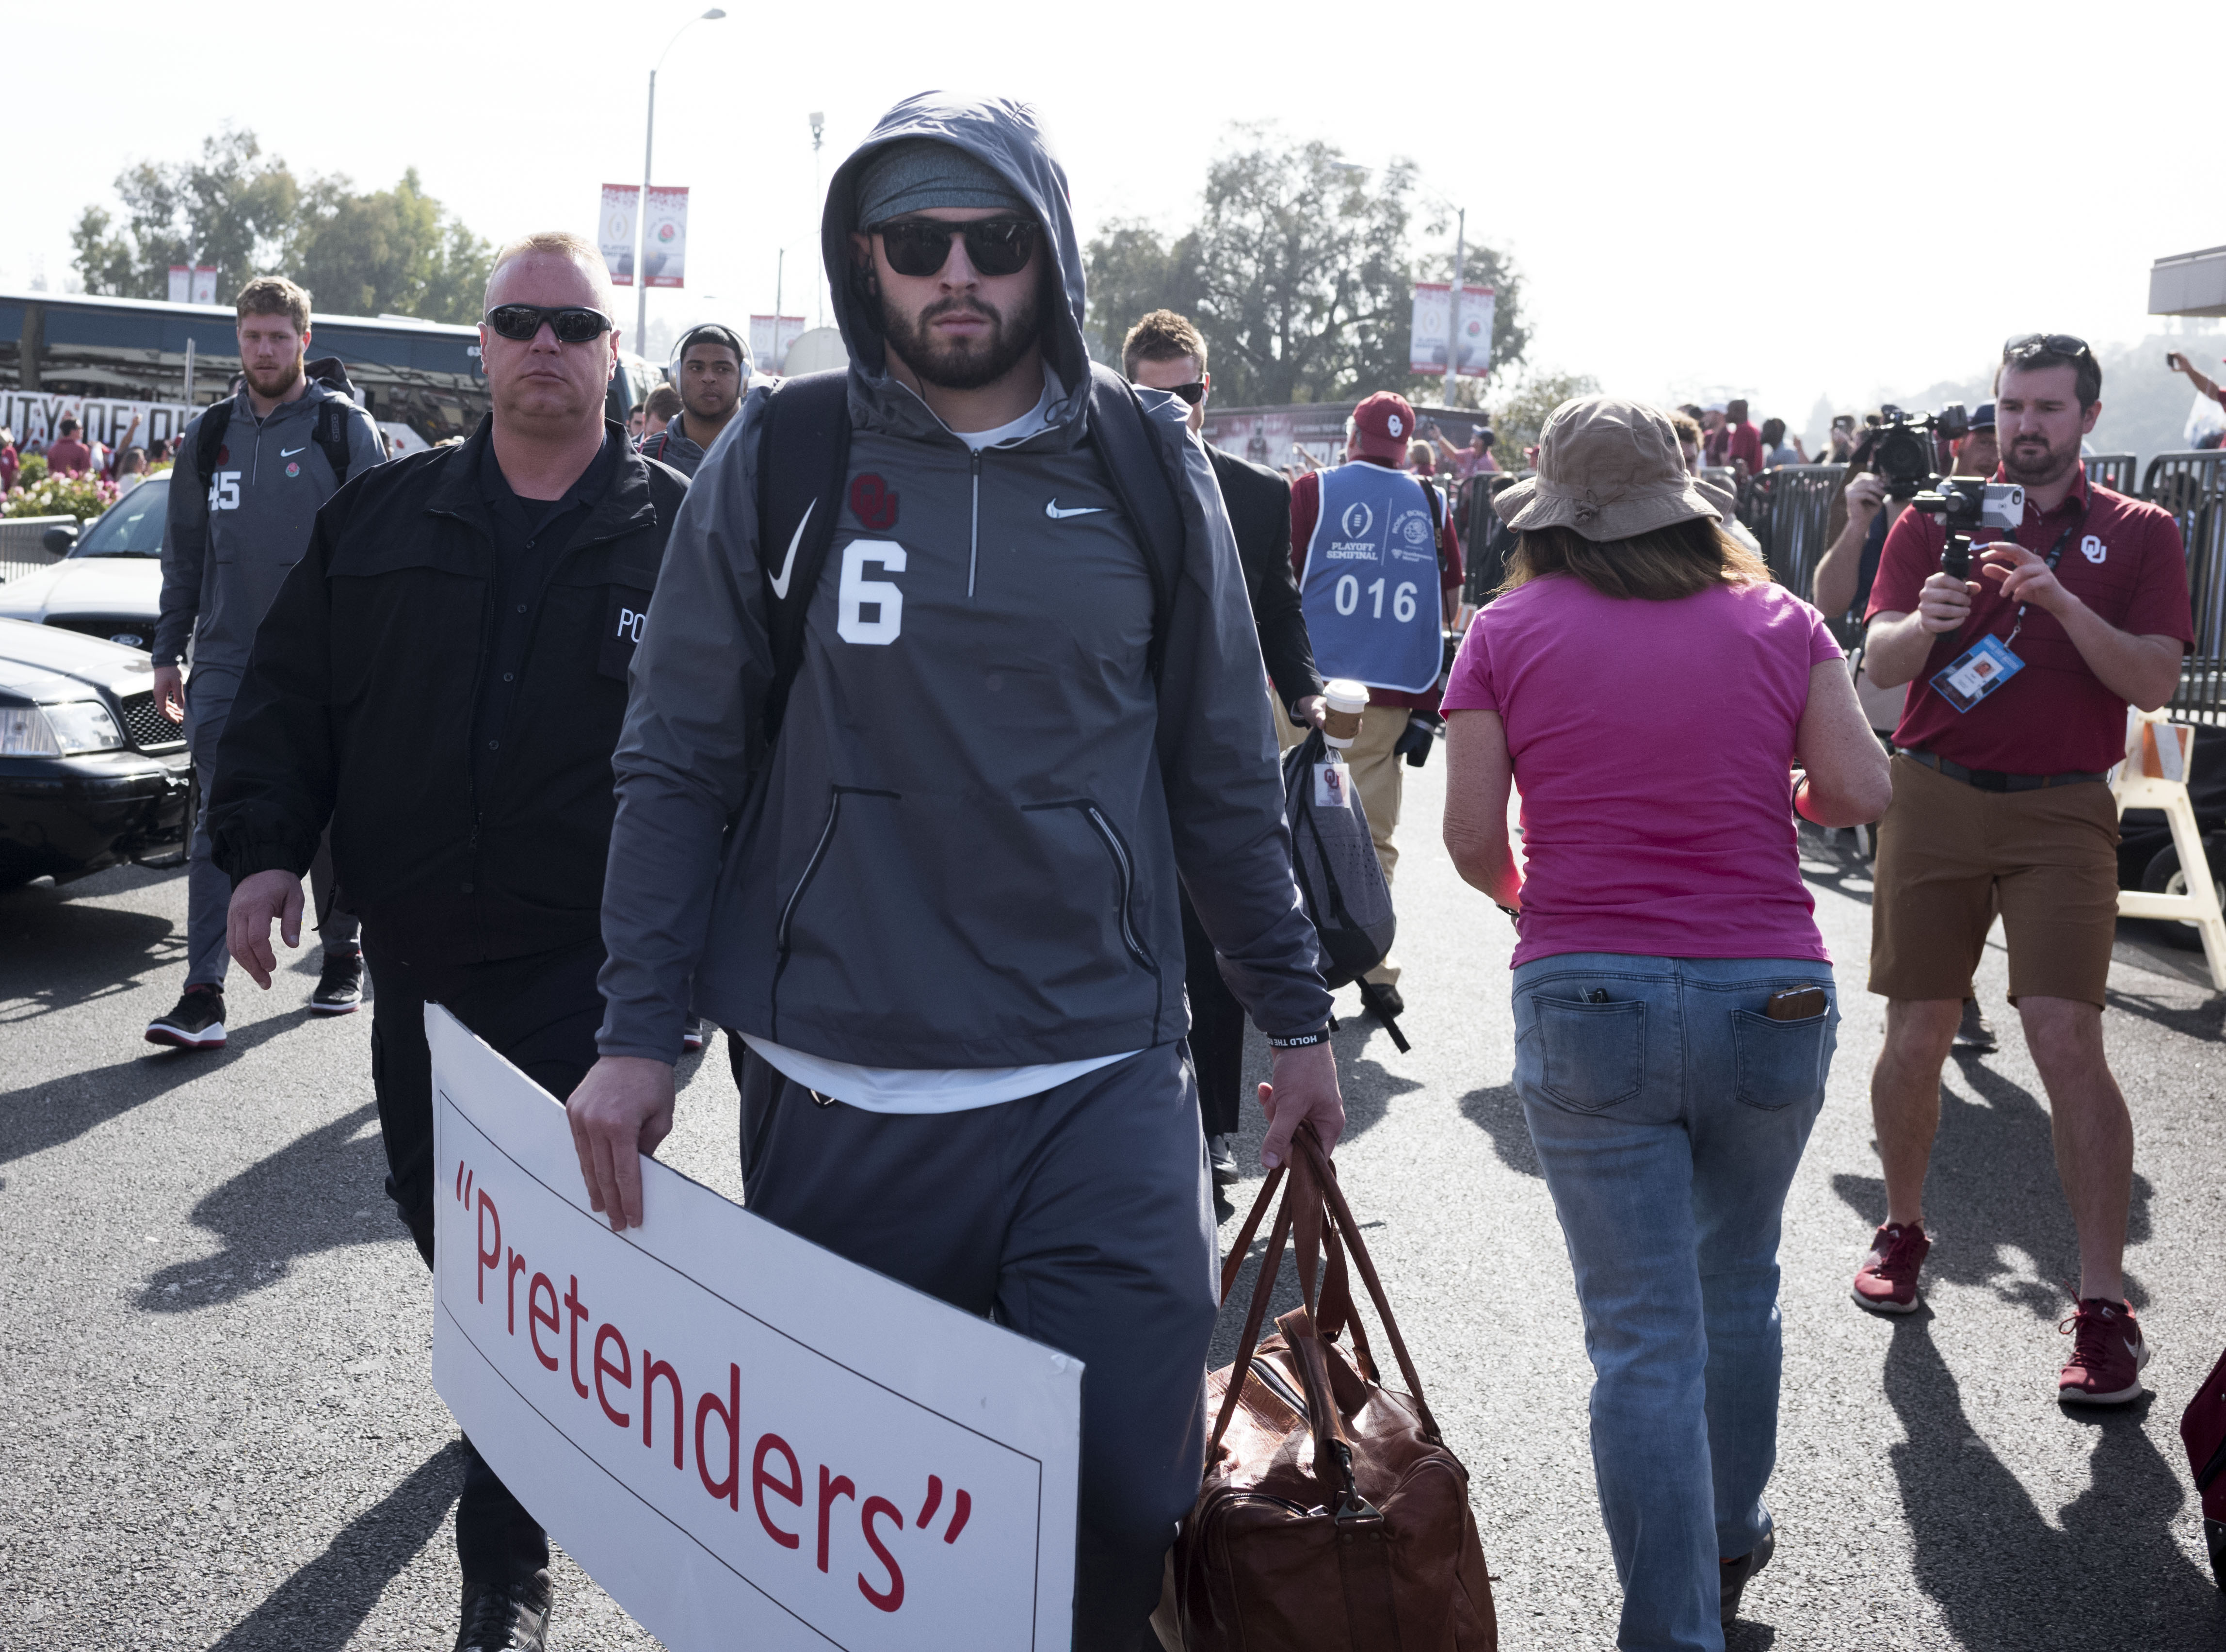 Baker Mayfield took a jab at Lee Corso with a 'pretenders' sign